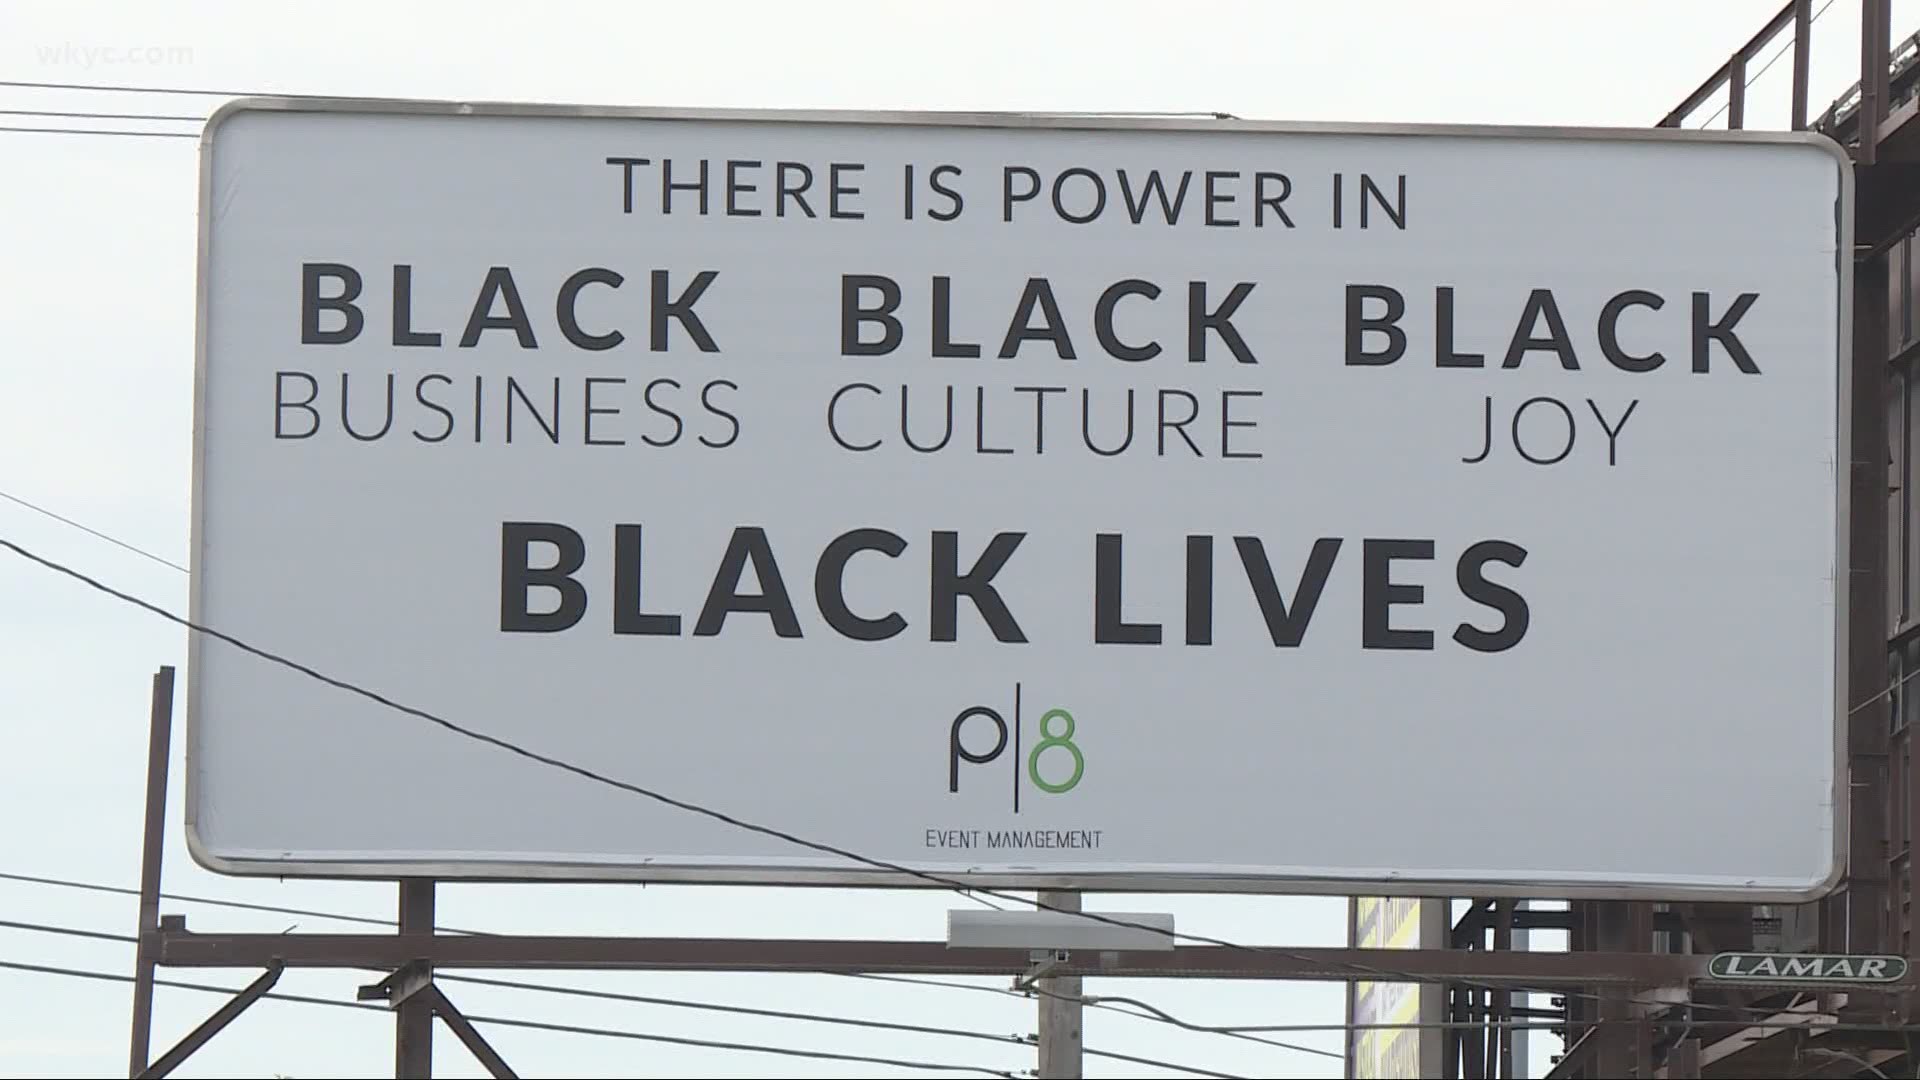 Black business. Black culture. Black joy. It's a message that Devin Joyce hopes sparks conversation that appears to be dying down.